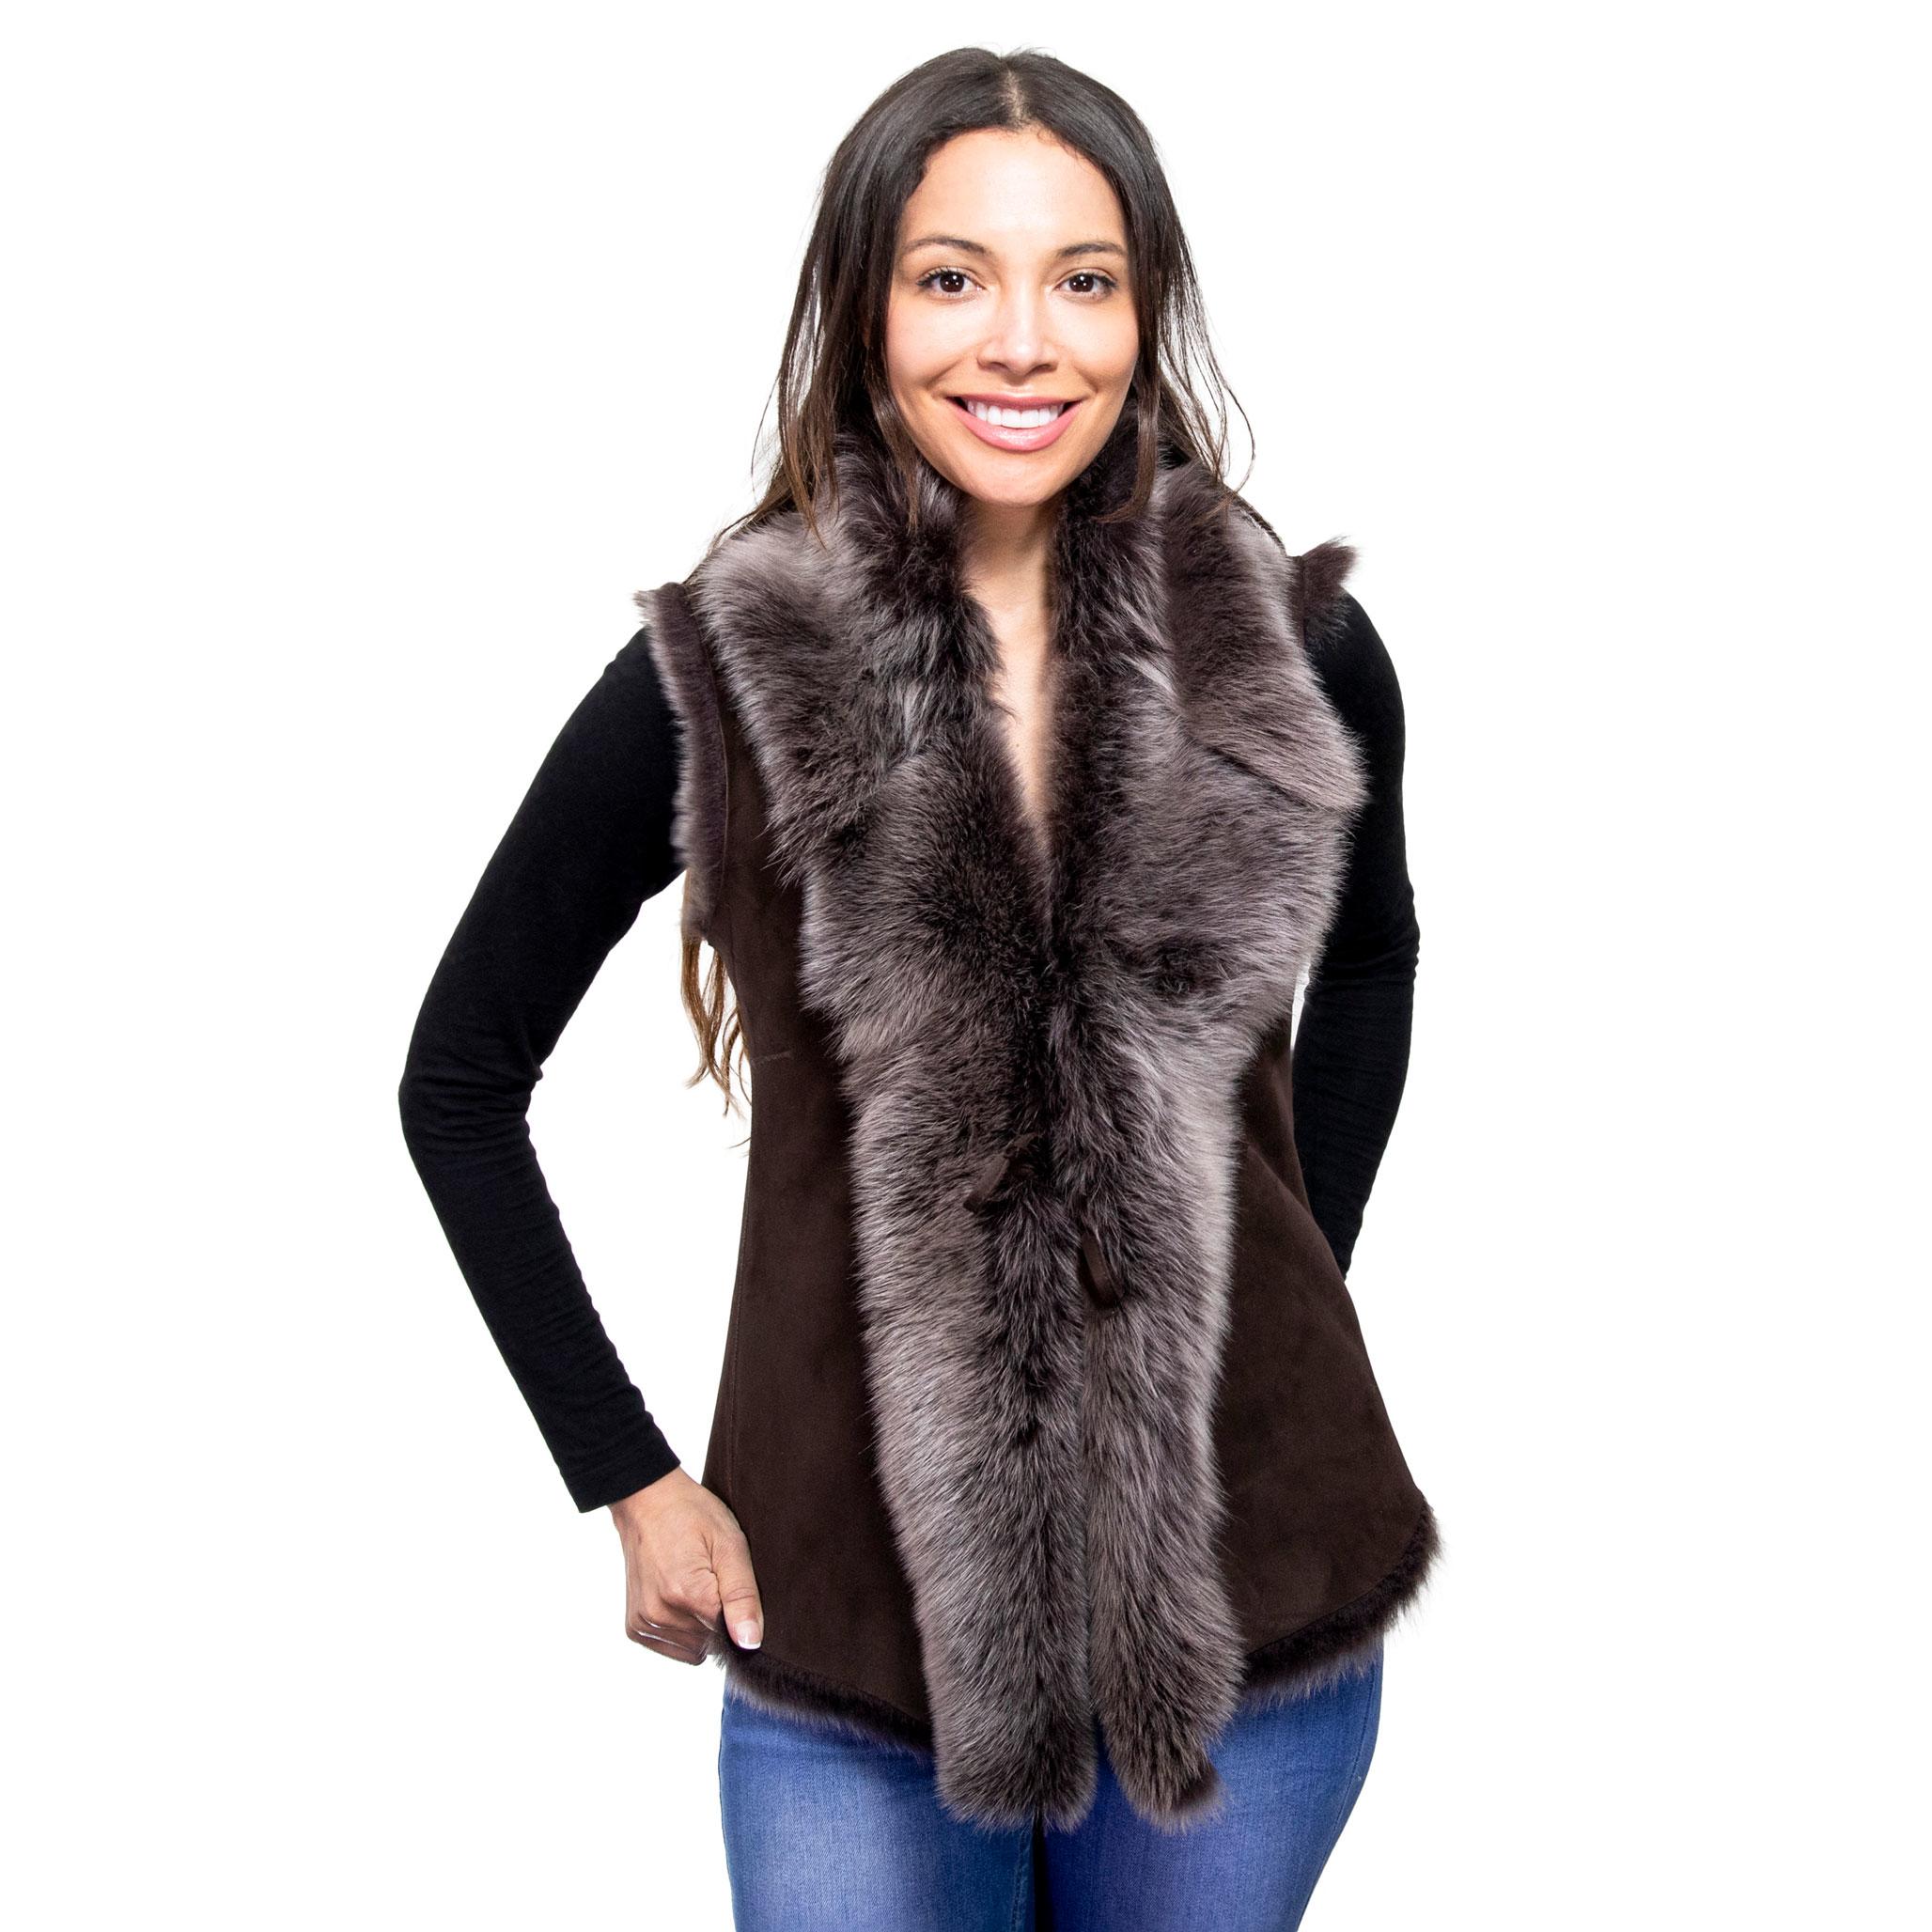 A model wears a beautiful, luxe brown sheepskin gilet, with a sued outer finish. Draped in lush Toscana fur.